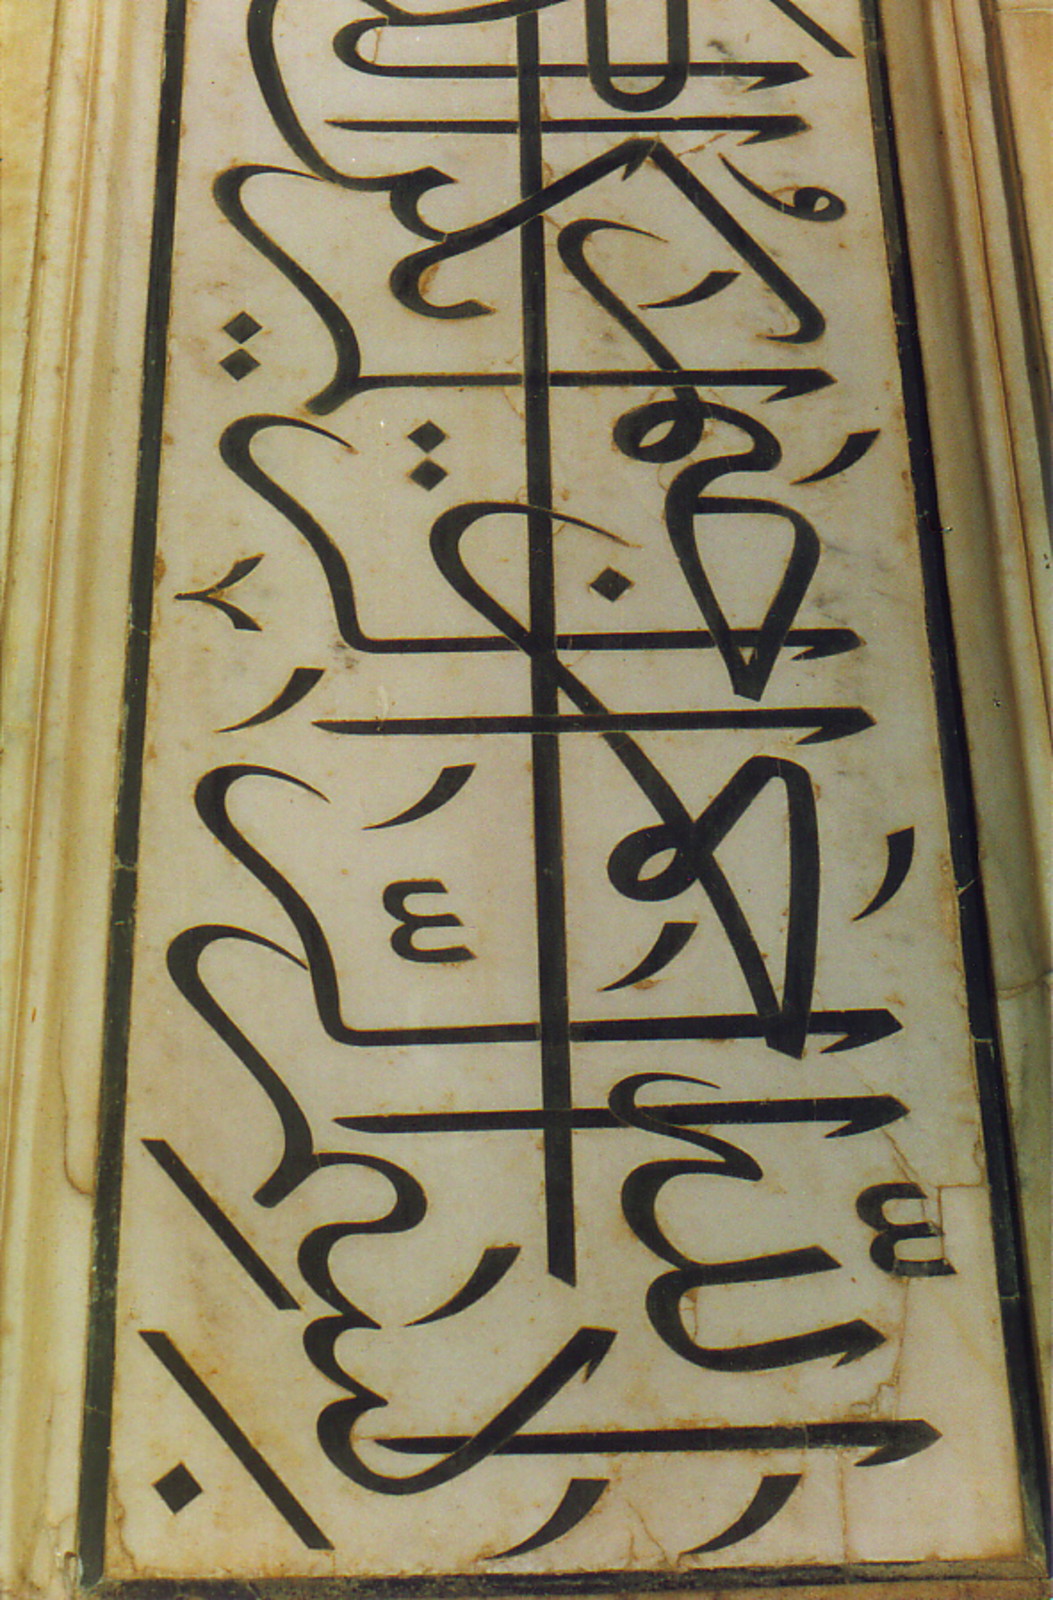 Arabic script around the entrance to the Taj; in translation it means 'In the name of Allah the most merciful and beneficial'